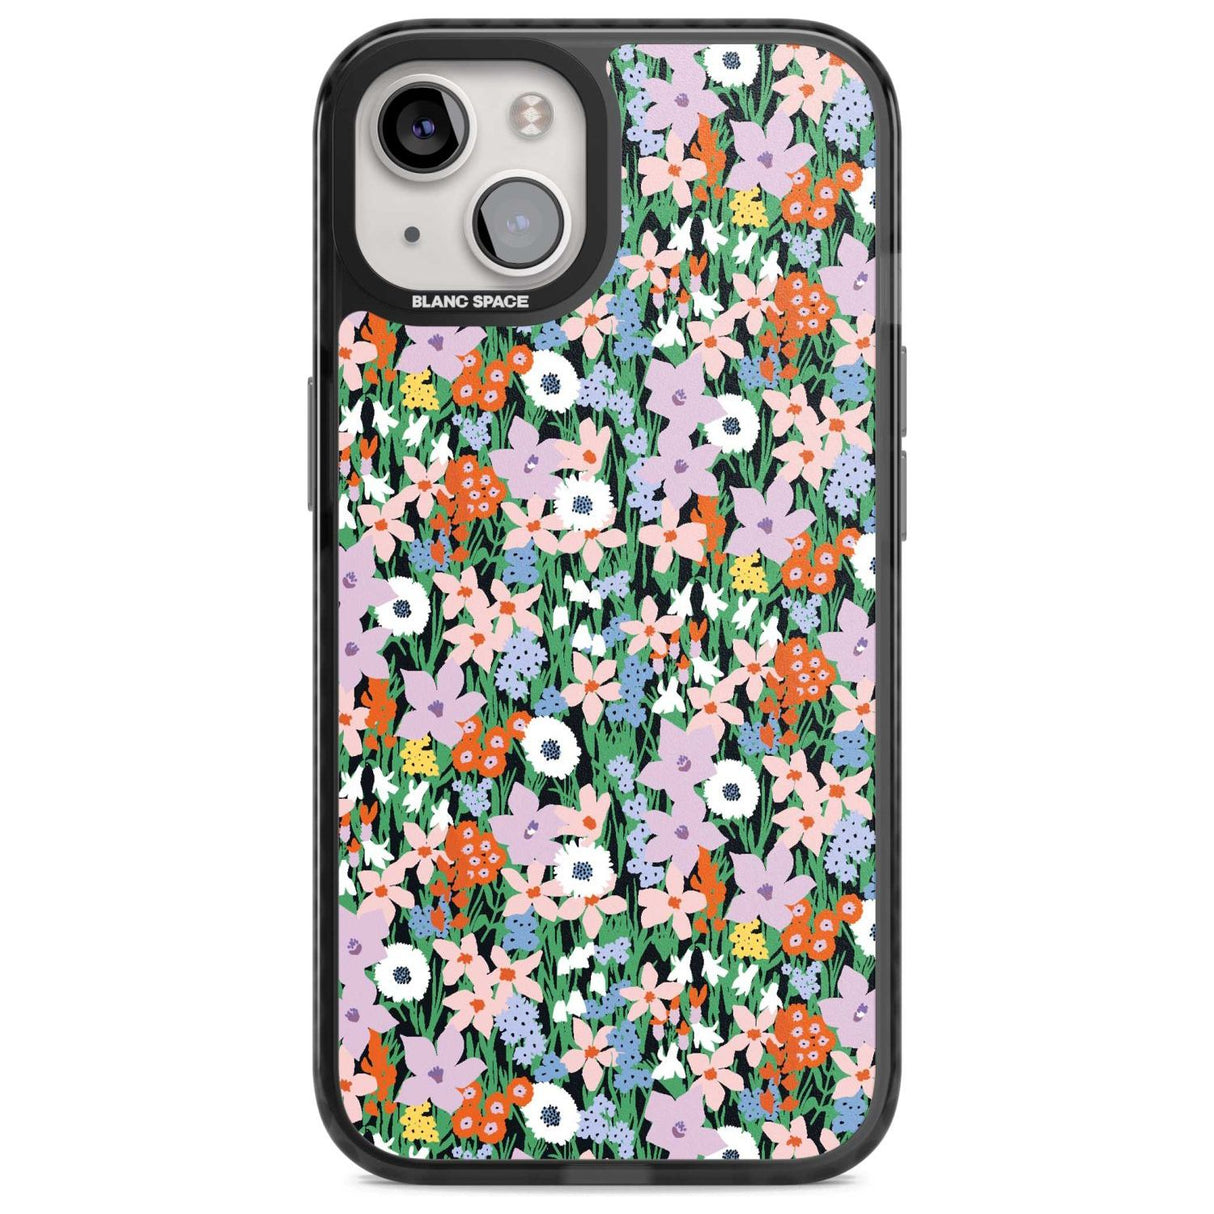 Jazzy Floral Mix: Solid Phone Case iPhone 15 Plus / Magsafe Black Impact Case,iPhone 15 / Magsafe Black Impact Case,iPhone 14 Plus / Magsafe Black Impact Case,iPhone 14 / Magsafe Black Impact Case,iPhone 13 / Magsafe Black Impact Case Blanc Space